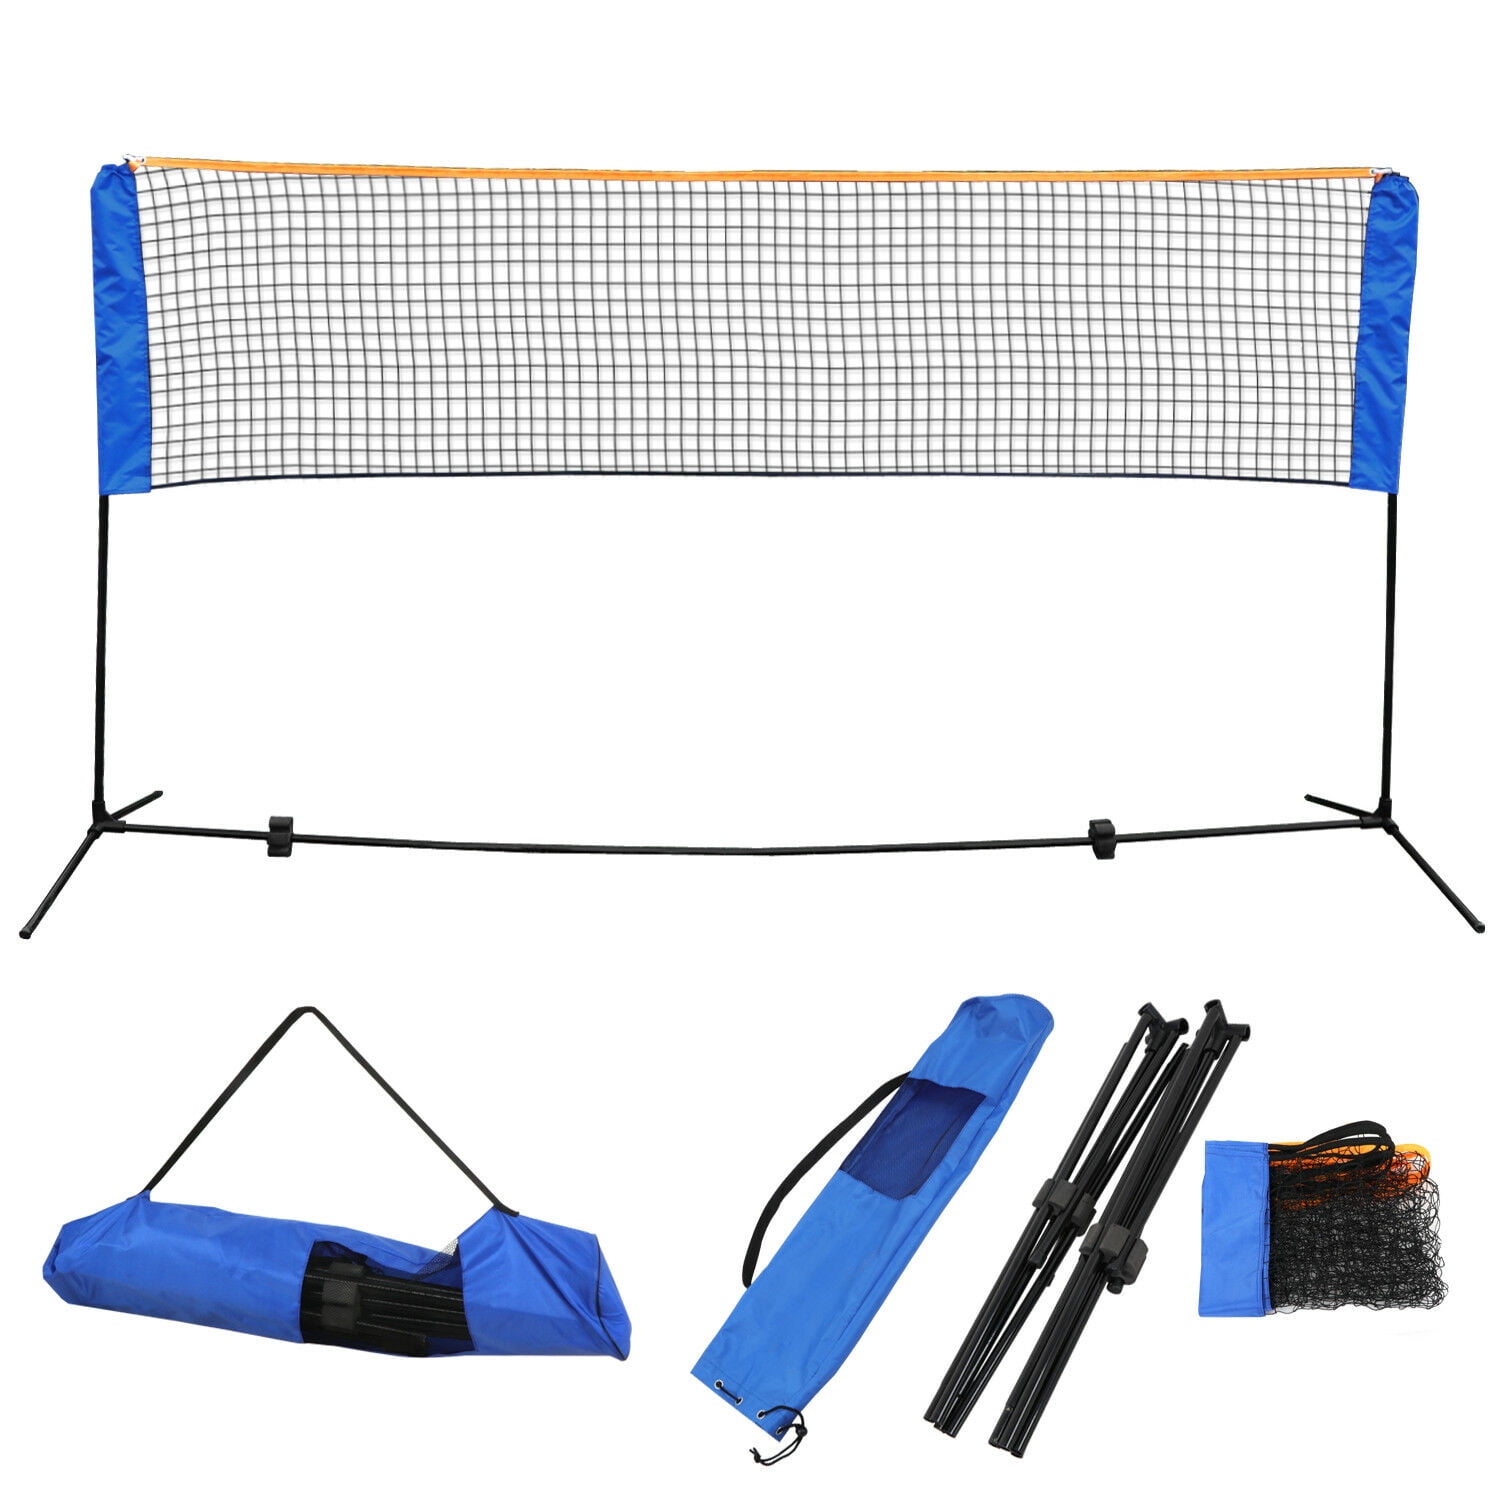 ZENSTYLE 10 Ft Long 5 Ft High Portable Badminton Net Beach Volleyball Tennis Competition Sports Training Net Set w/Poles, Stand and Carrying Bag,Height Adjustable Outdoor,Beach Games